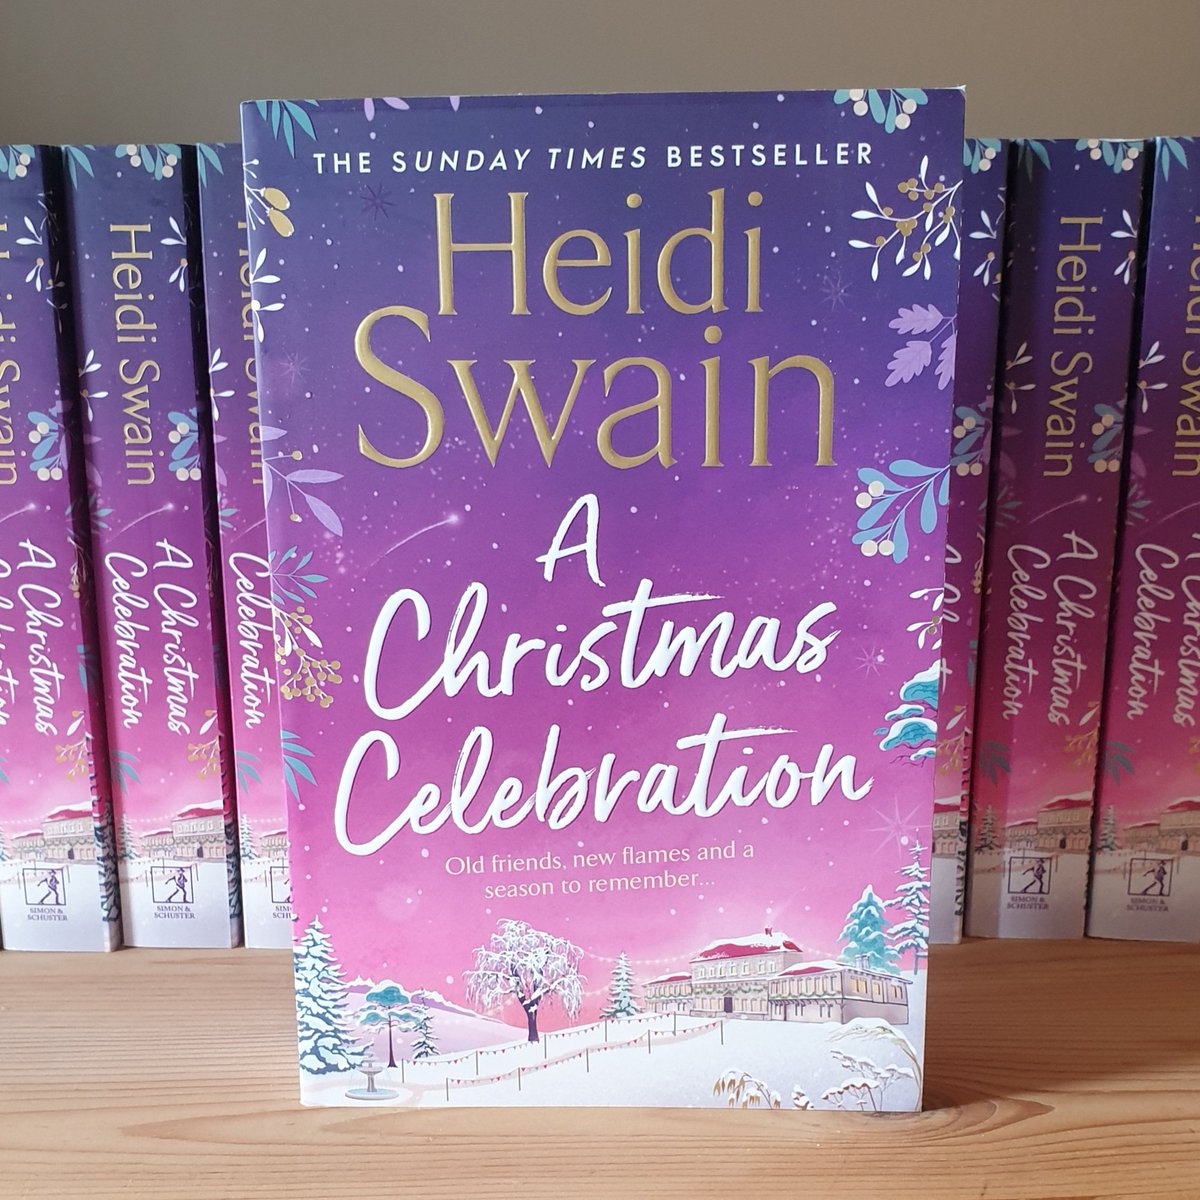 It's now just 2 months until #christmas so why not join the fabulous folk in the Fens for a trip to #WynthorpeHall that's full of romance, family, friendships and of course, all the seasonal trimmings? #AChristmasCelebration is out now! 🌲💜🍾💜🌲💜🍾💜🌲 amzn.eu/d/fflbOxl